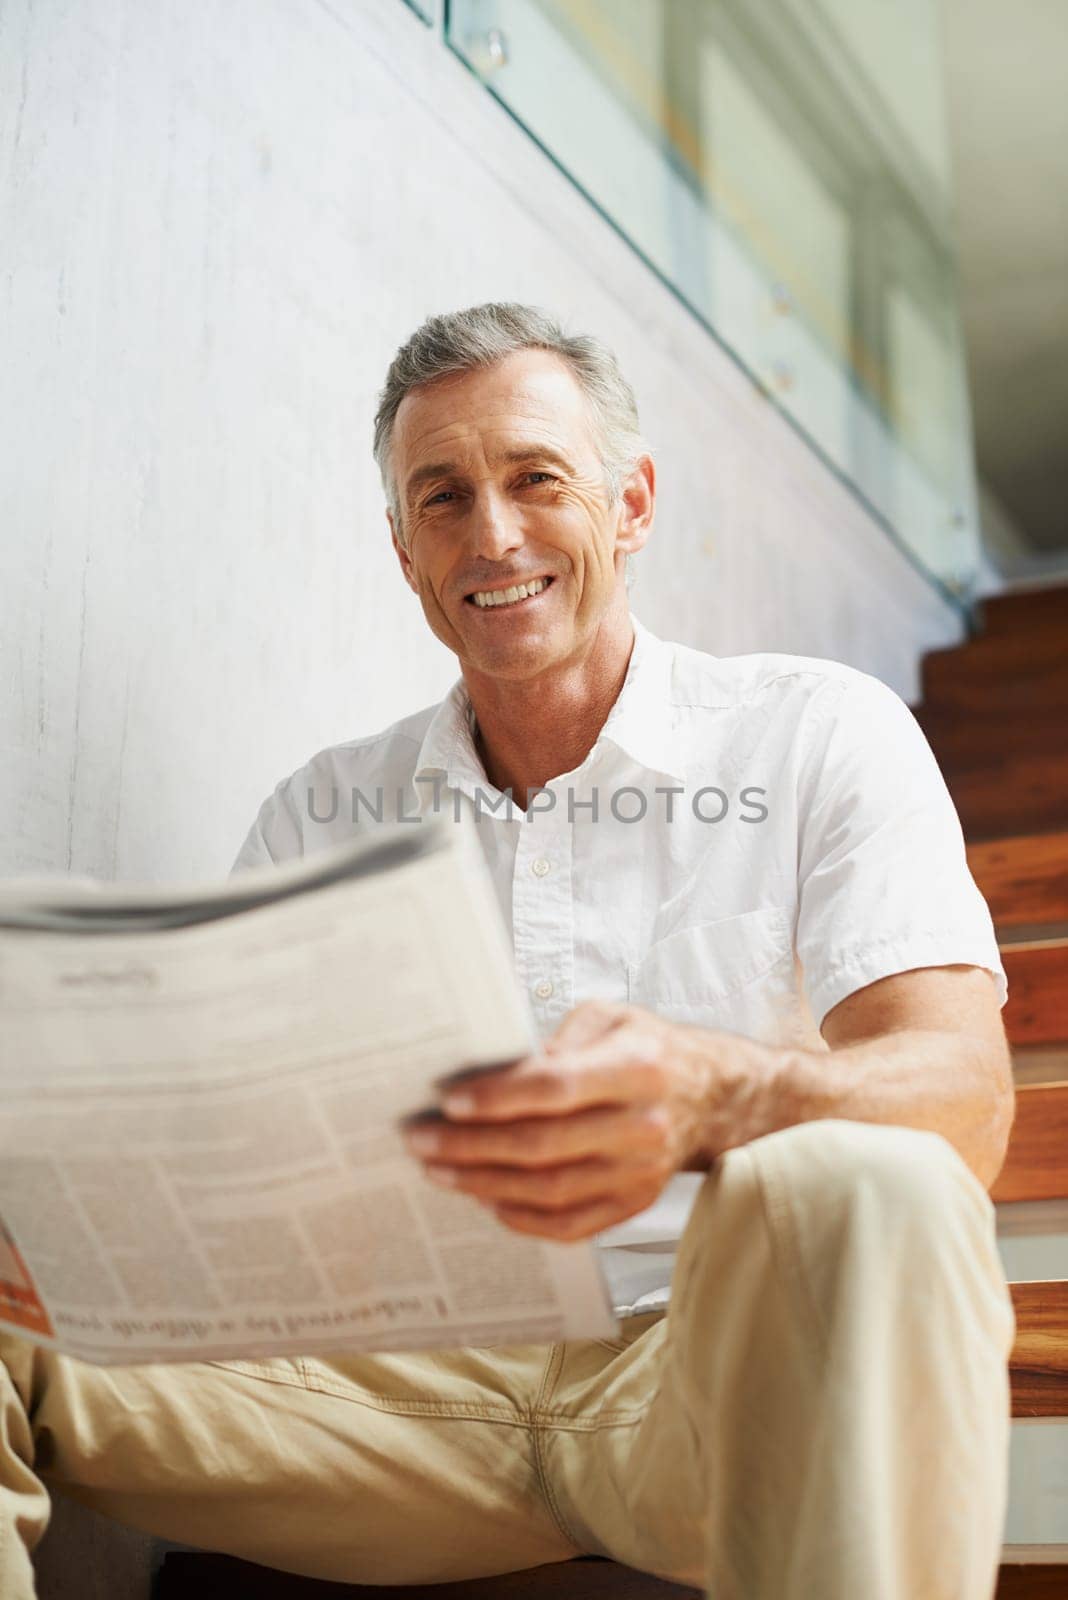 Mature, man and portrait with newspaper in office for stock market review for global news, journalist or investment. Male person, face and business section on stairs for financial, report or press.